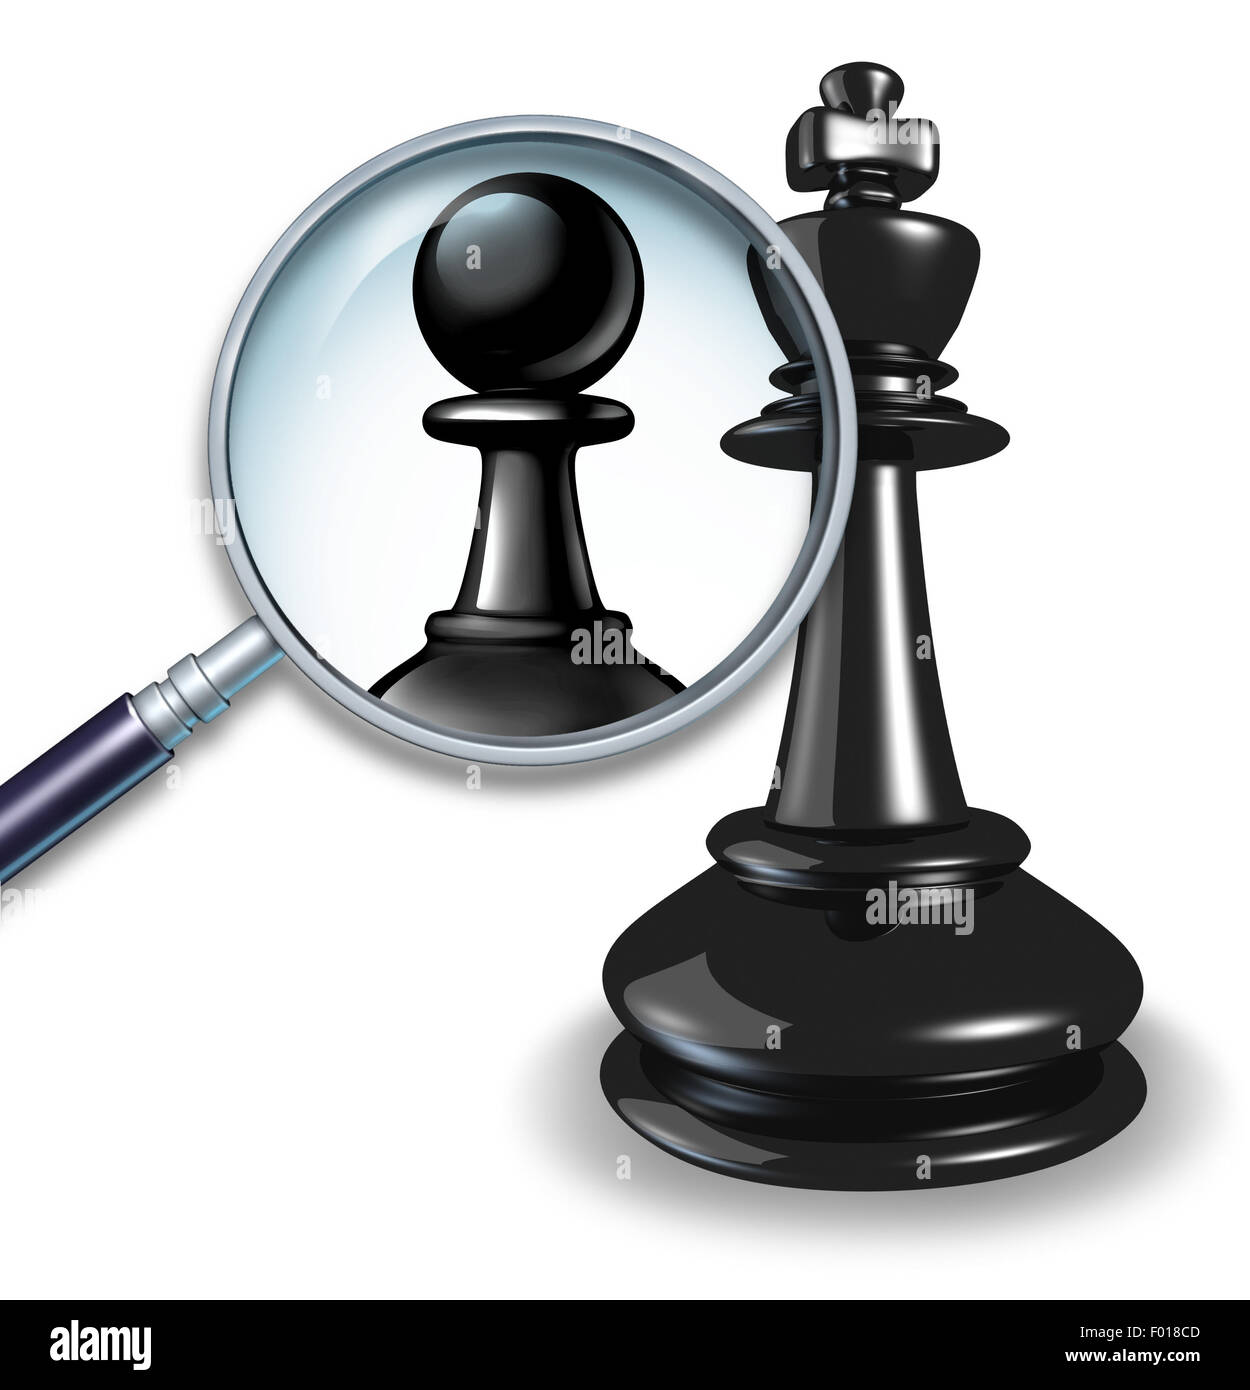 Not a leader business concept with a chess game king and a magnifying glass showing a change to a pawn follower or employee figure as a symbol of failed leadersip and lack of management skill. Stock Photo